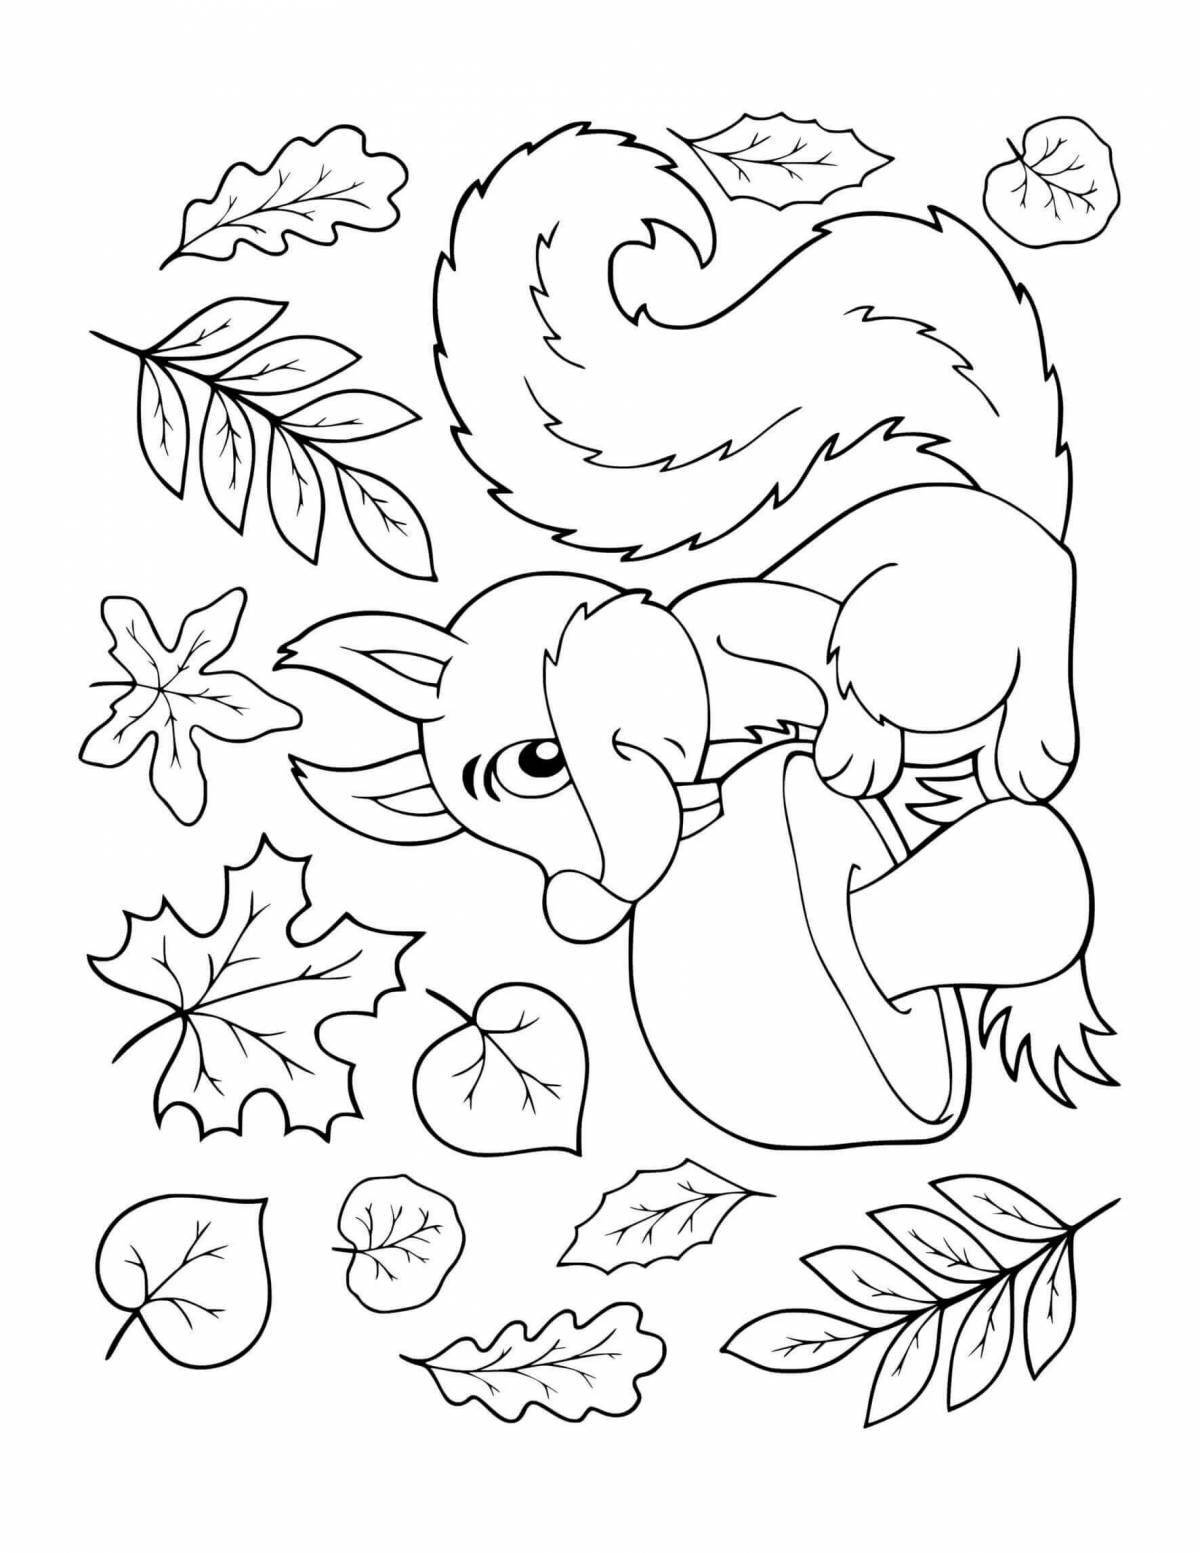 Adorable autumn coloring book for 5-6 year olds